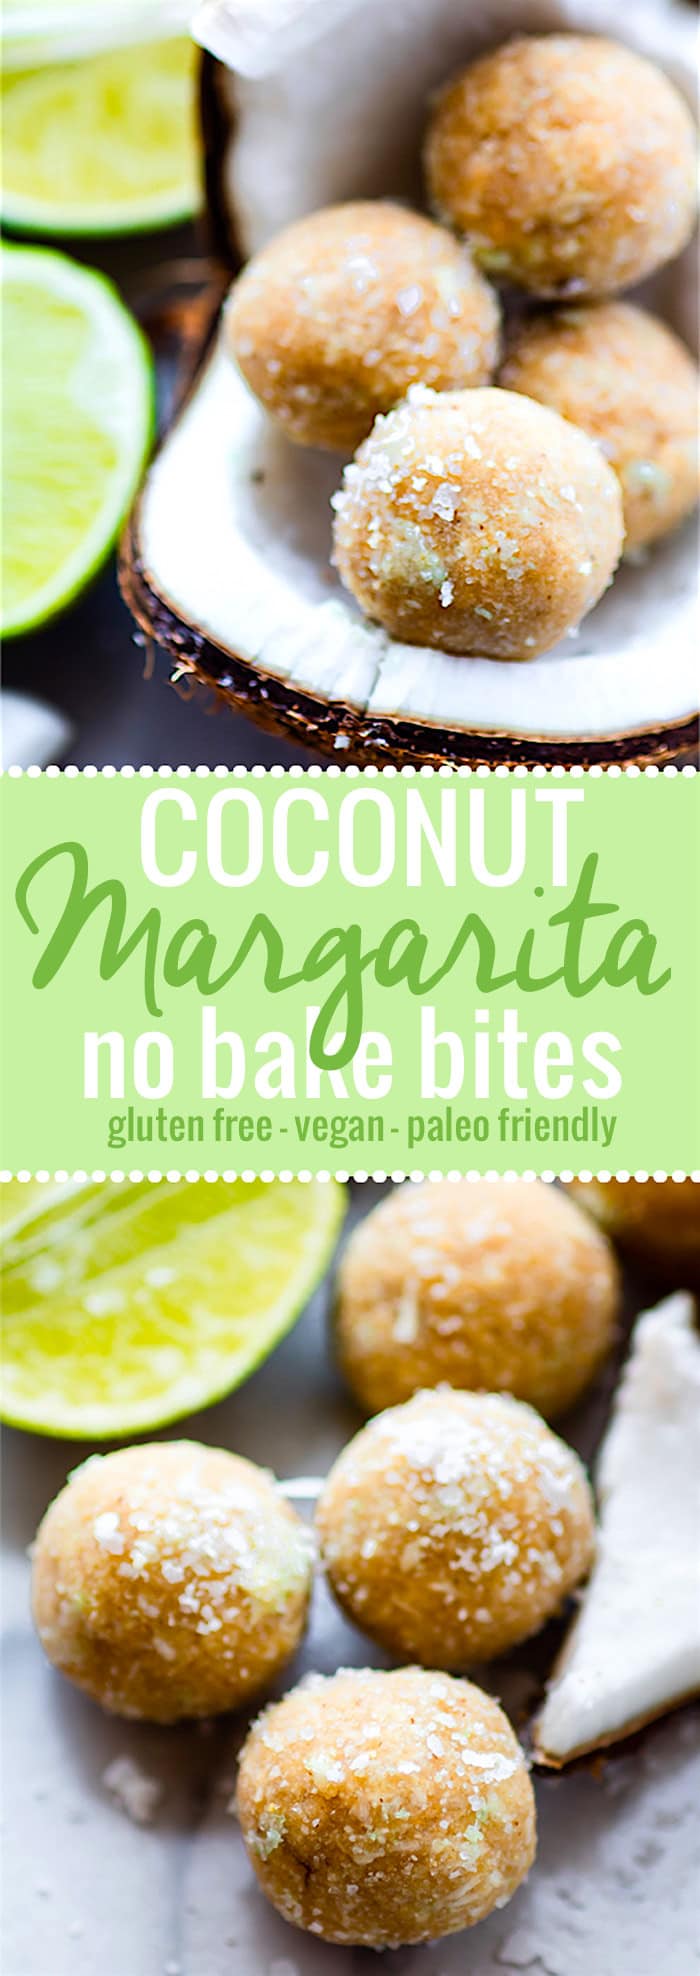 No Bake Coconut Margarita Bites! Super simple no bake coconut margarita treats in dessert bite form! These bites are naturally gluten free, paleo friendly, and vegan! Bites that actually taste like a frozen margarita with natural lime and coconut flavors. So refreshing for summer or anytime of year! @cottercrunch